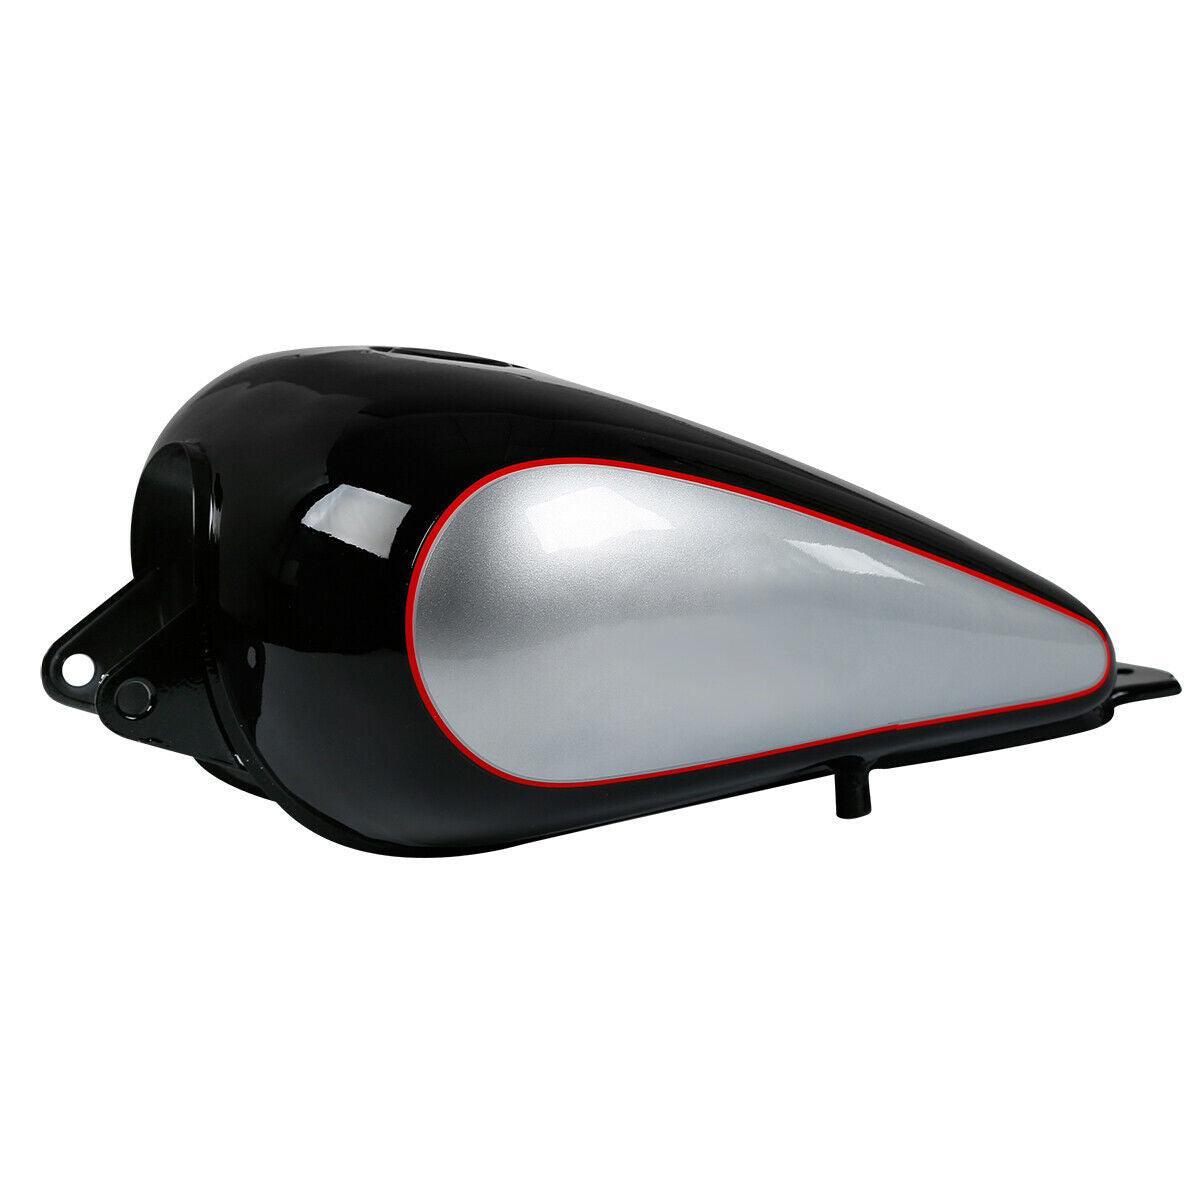 Motorcycle 3.4 gallons Fuel Gas Tank Fit For Honda CMX250 CMX 250 Rebel 85-16 15 - Moto Life Products